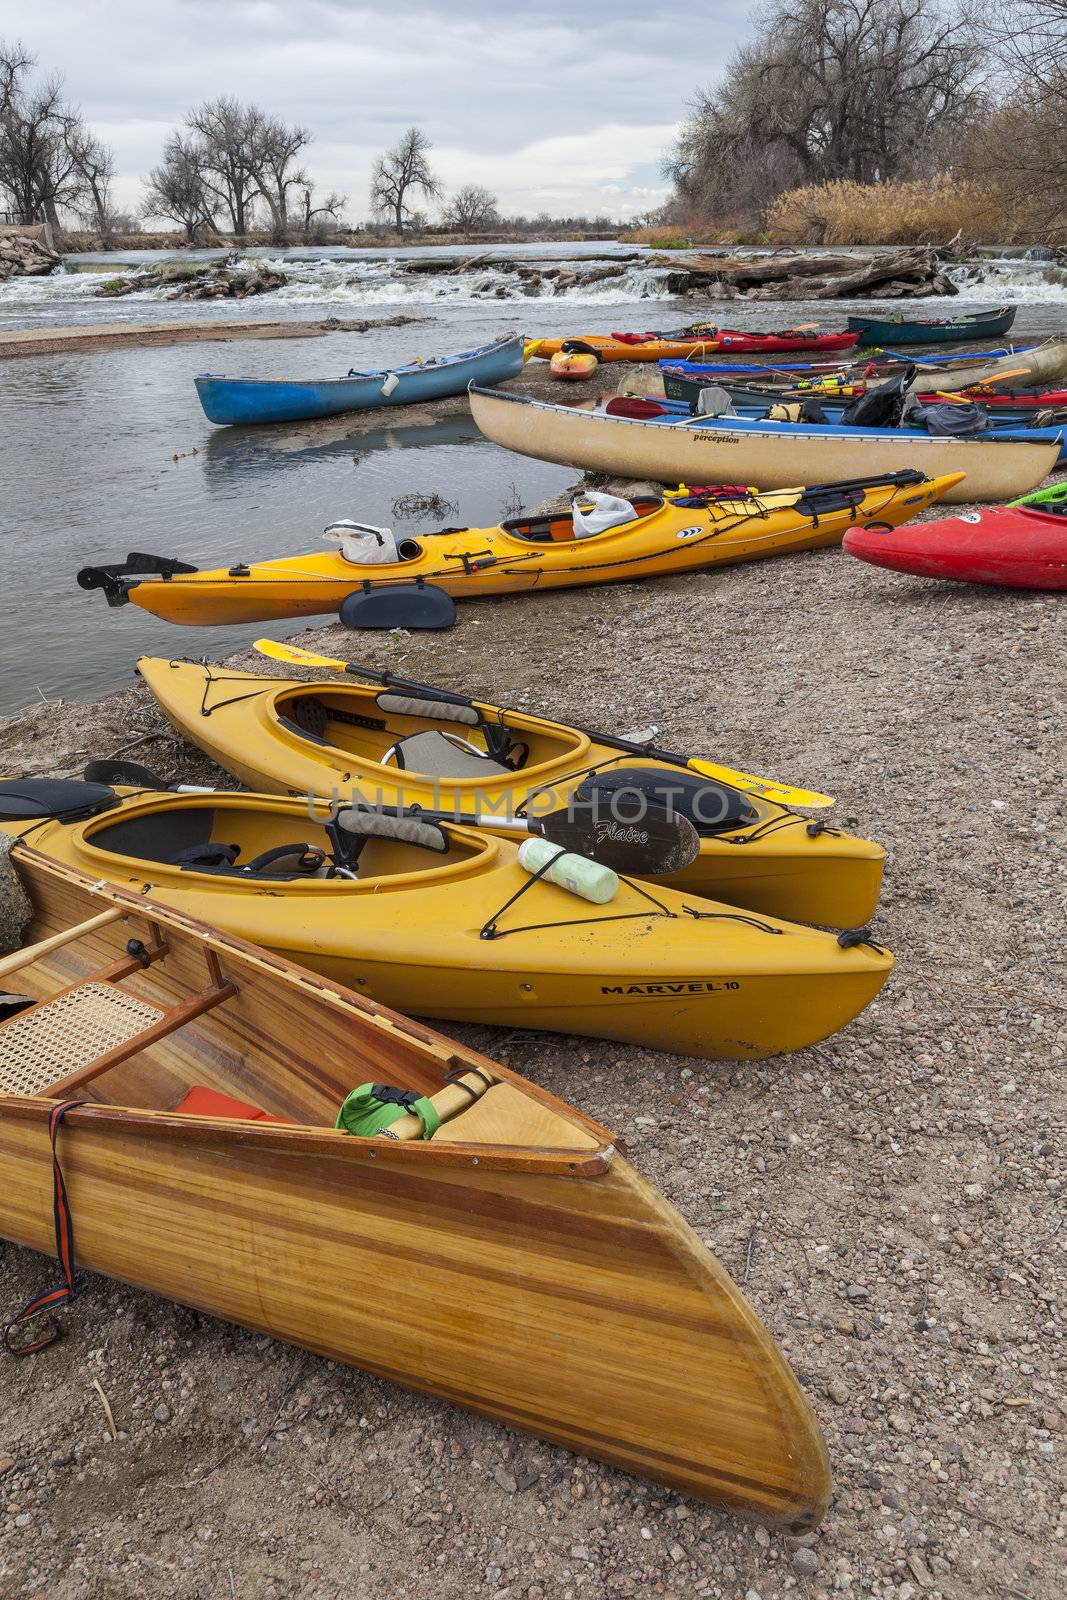 SOUTH PLATTE RIVER, EVANS, COLORADO - APRIL 6: Kayaks and canoes on a river shore below diversion dam during Annual All Club Paddle on April 6, 2013, a popular season opening paddling trip in northern Colorado.